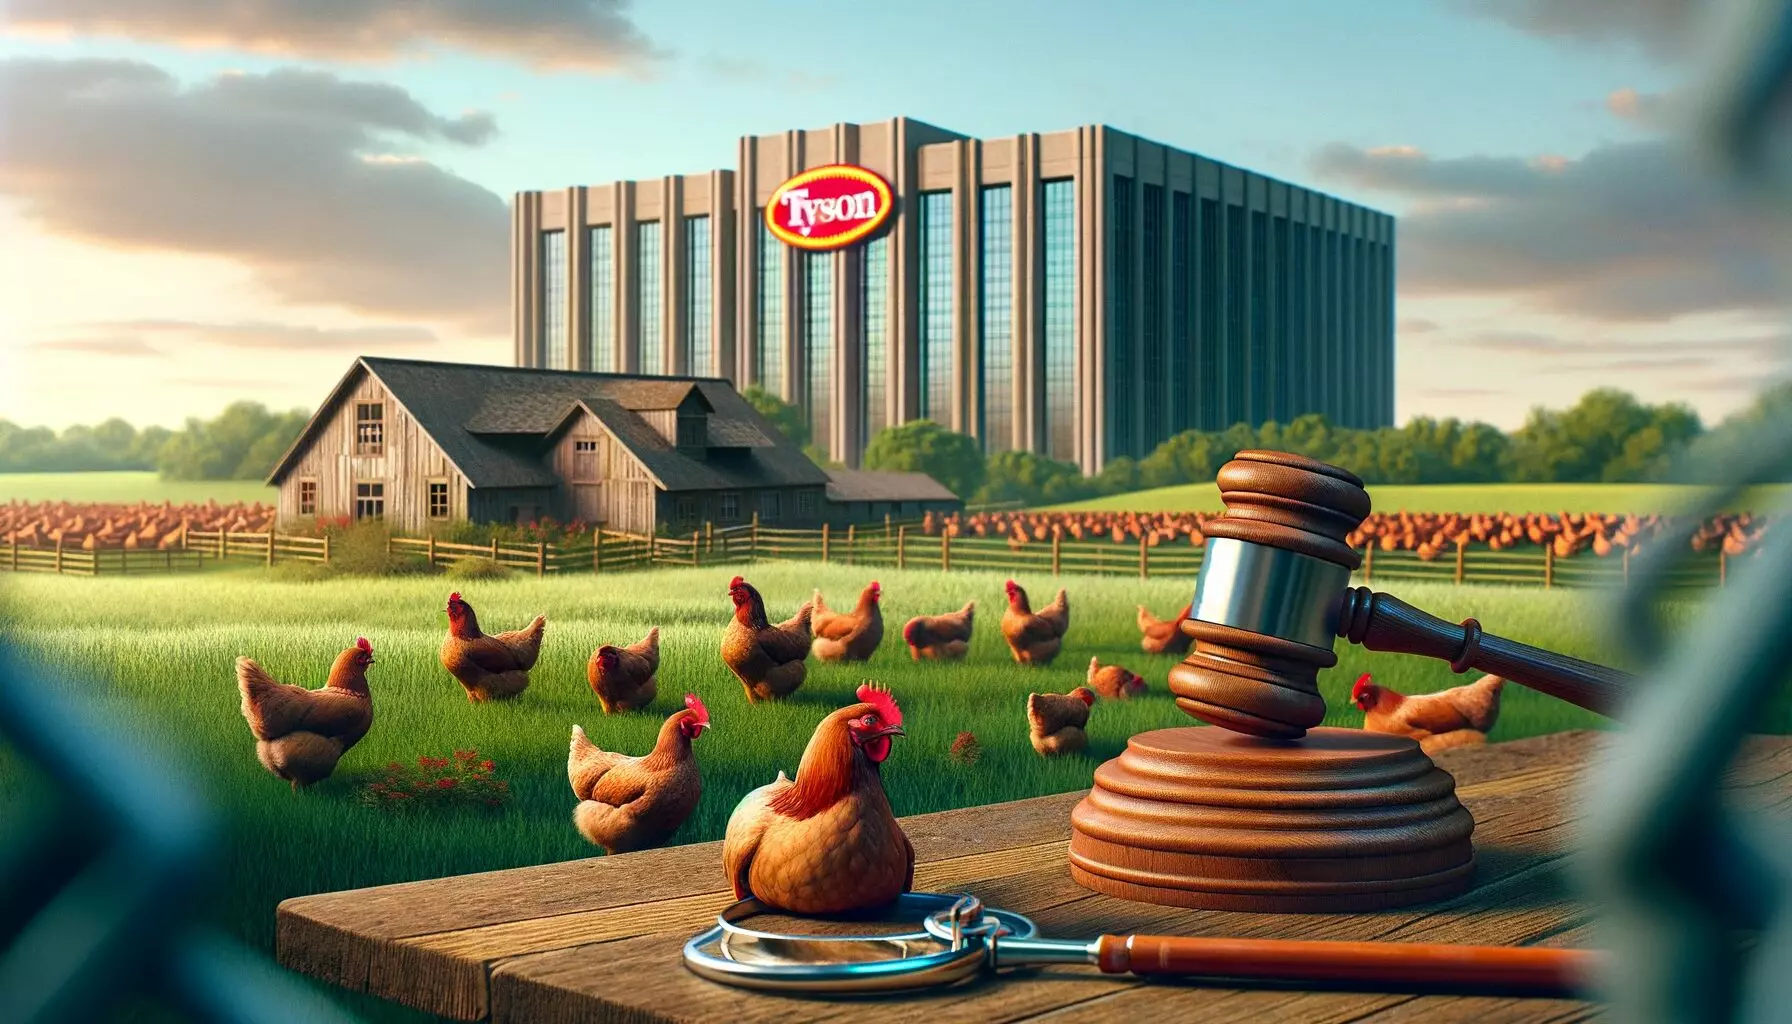 A-conceptual-image-representing-a-lawsuit-between-chicken-farmers-and-a-large-corporation-It-features-a-rural-farm-landscape-with-chickens-a-large-c